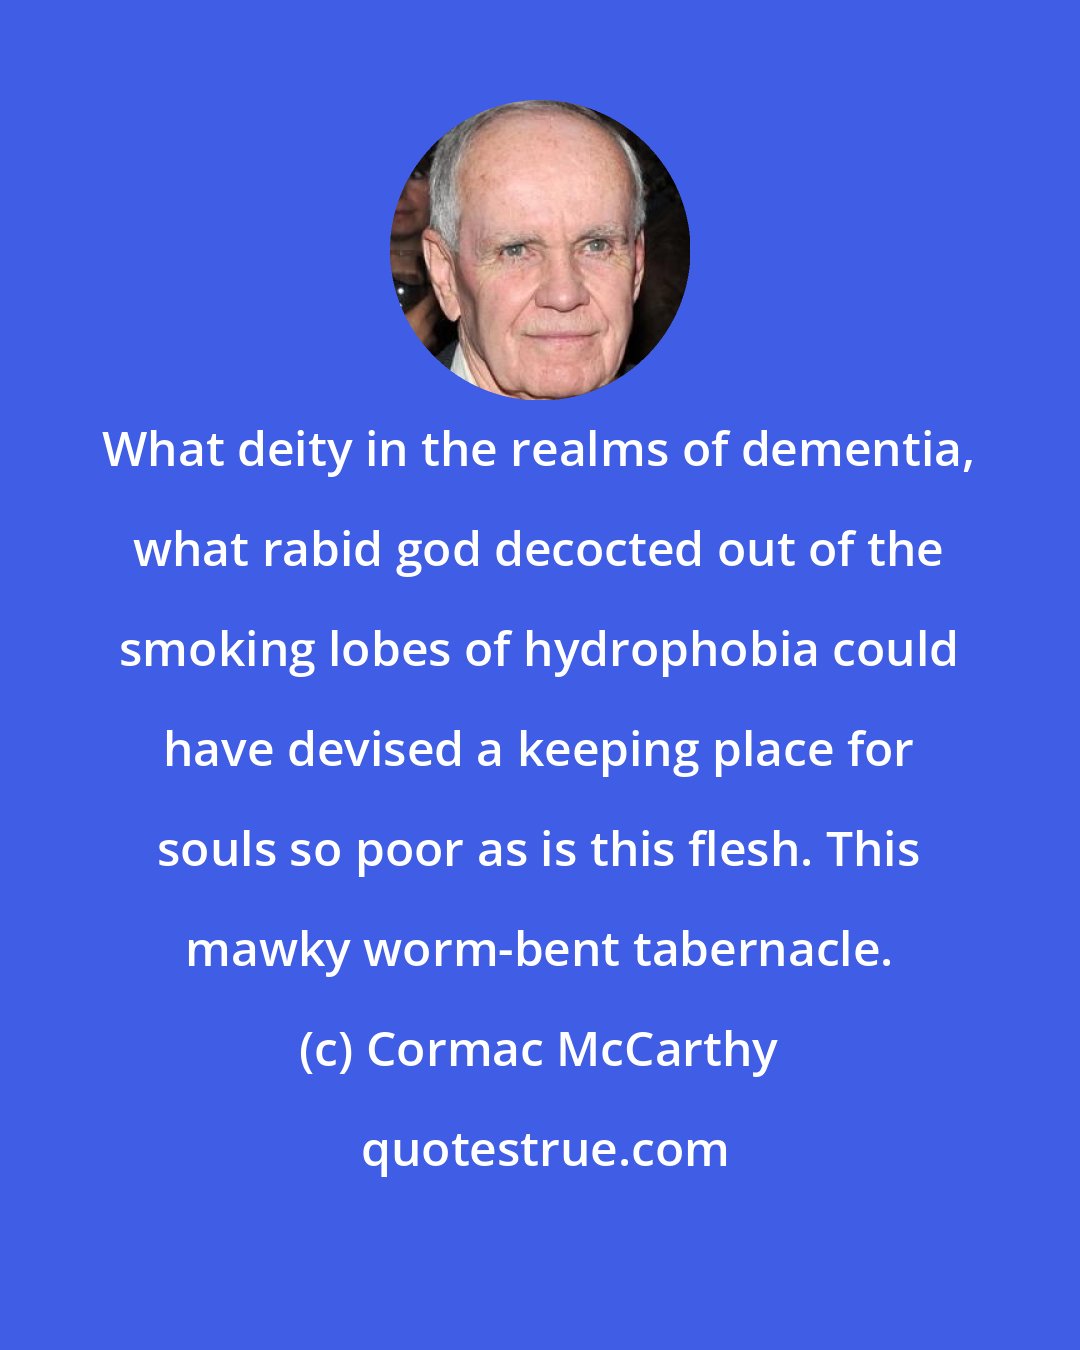 Cormac McCarthy: What deity in the realms of dementia, what rabid god decocted out of the smoking lobes of hydrophobia could have devised a keeping place for souls so poor as is this flesh. This mawky worm-bent tabernacle.